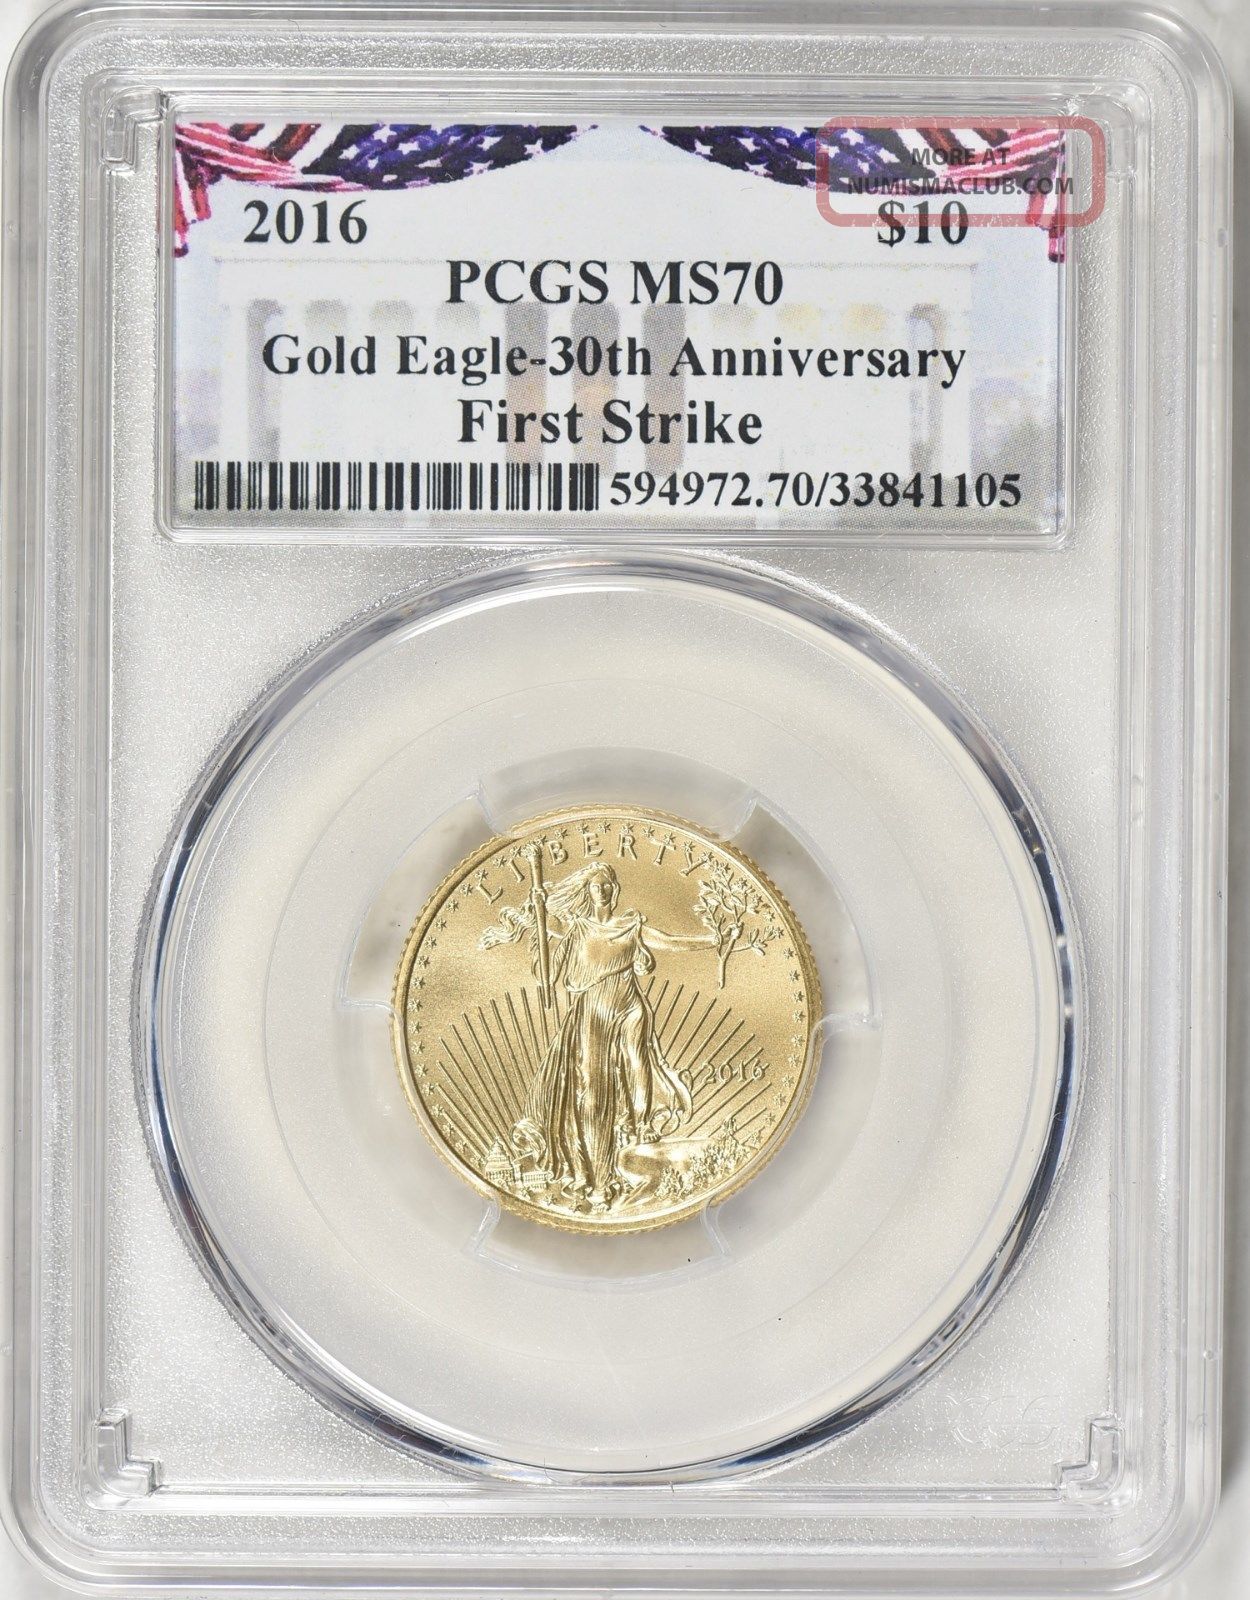 2016 $10 Gold Eagle Gold Eagle - 30th Anniversary First Strike Bunting Label Ms70 Gold photo